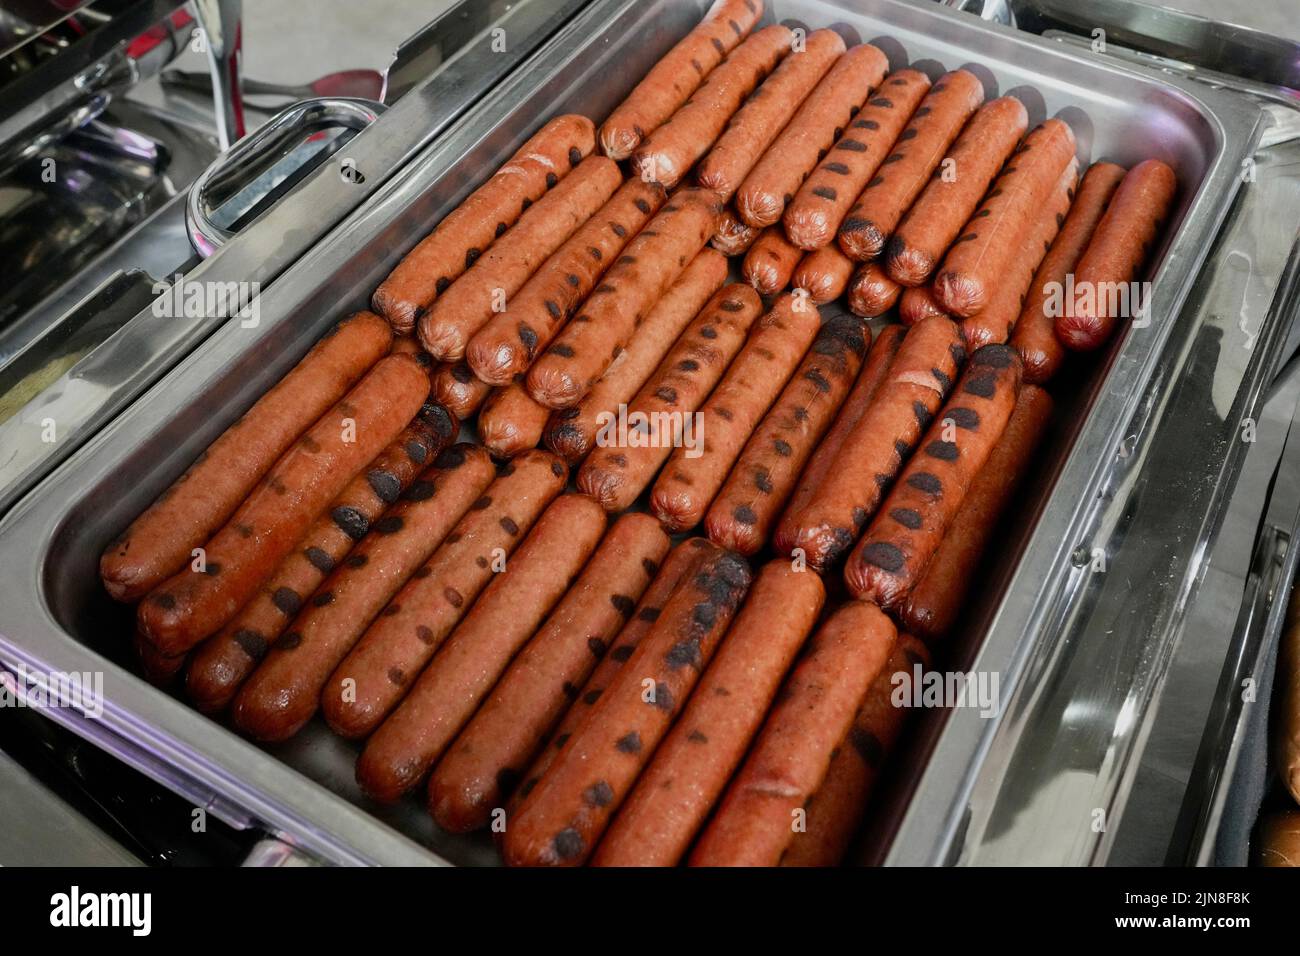 A group of hot dogs in a tray at a buffet. Stock Photo